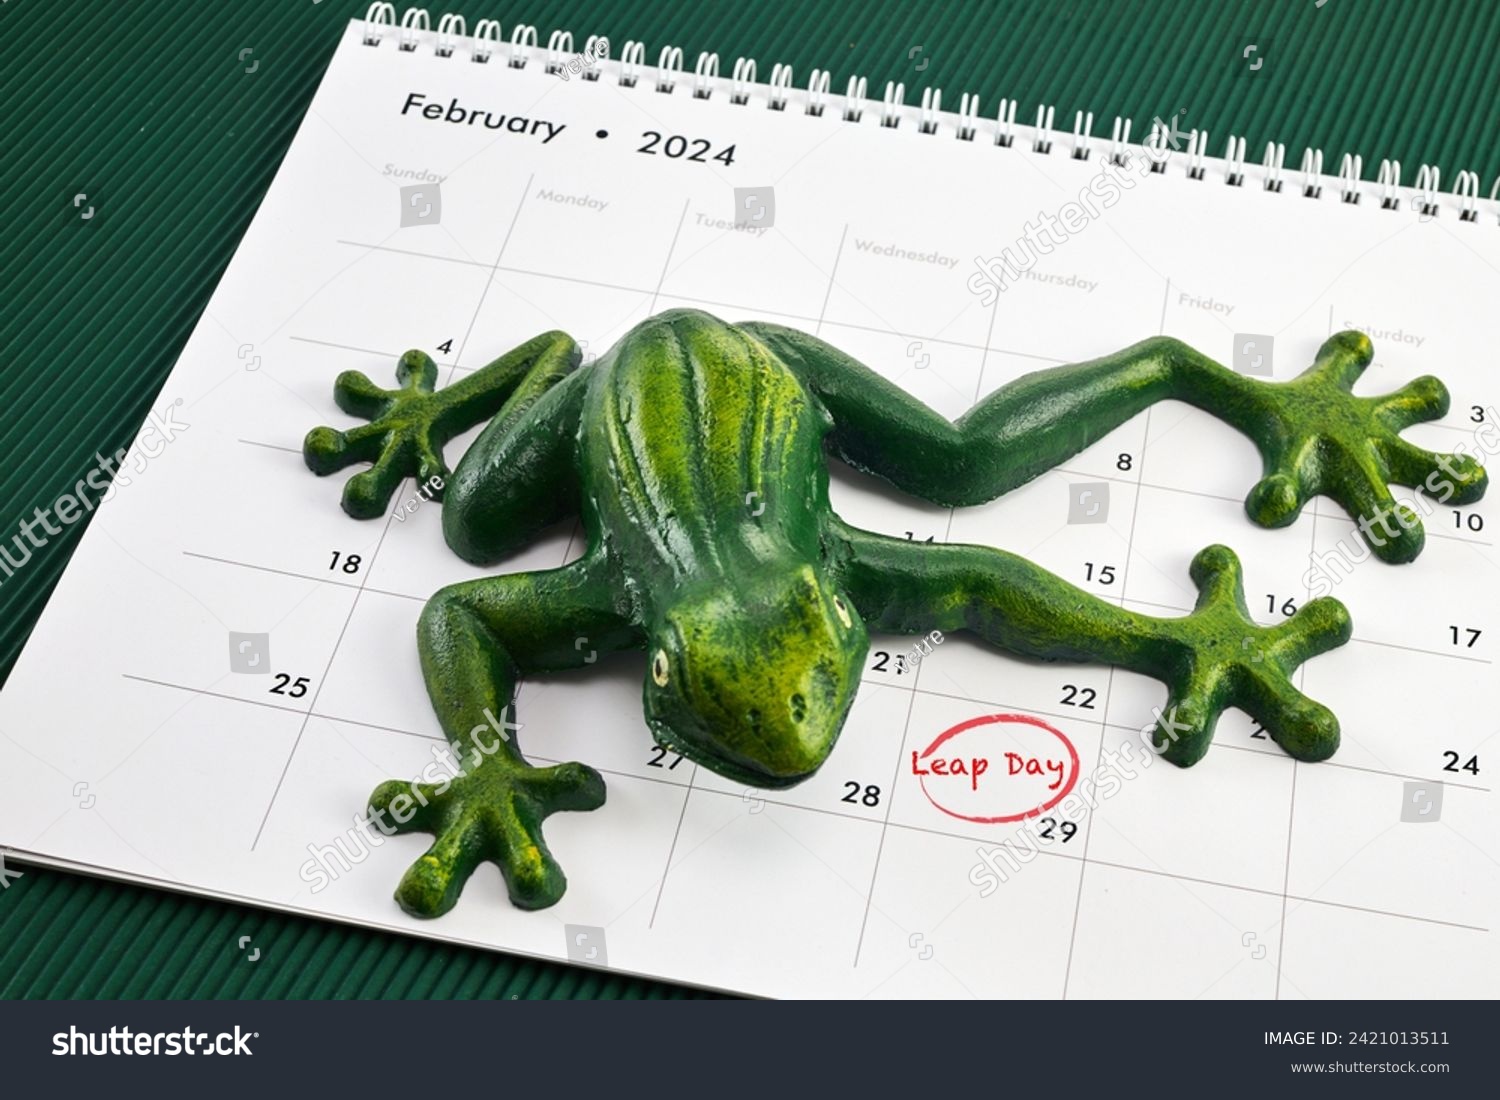 Happy Leap Day on 29 February with Jumping Frog #2421013511